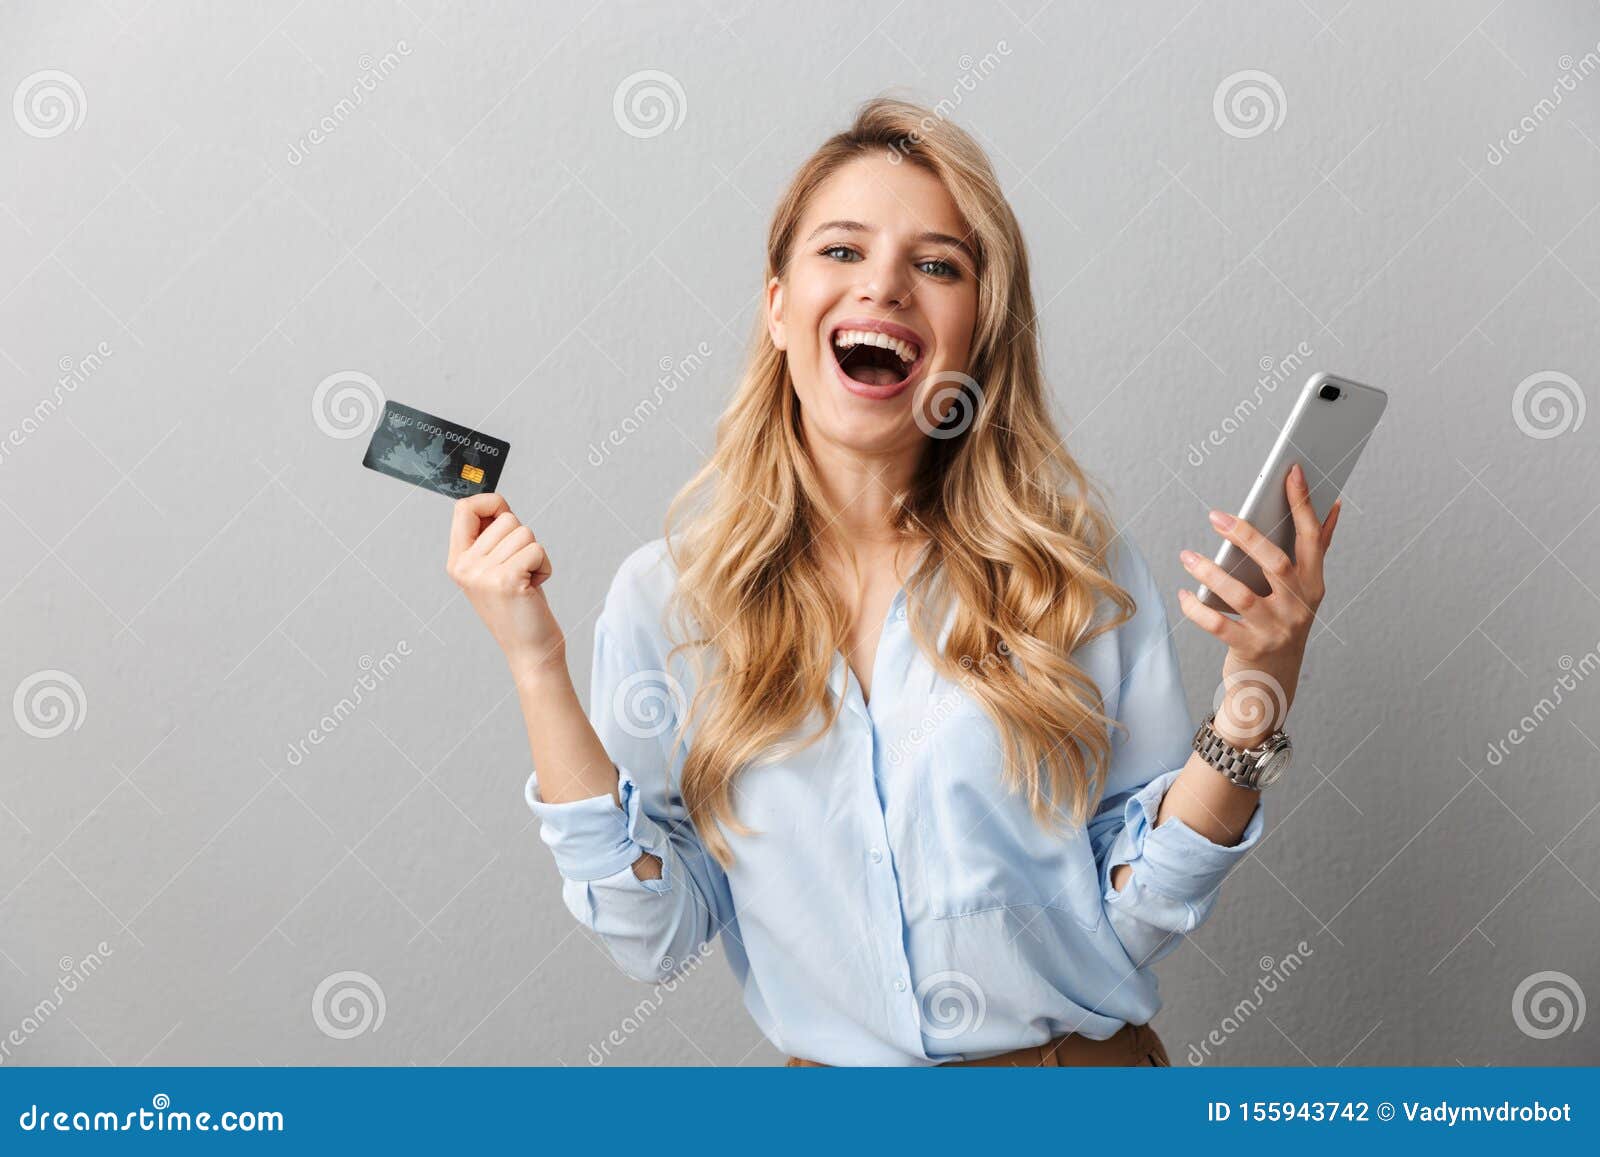 happy young pretty blonde business woman posing  grey wall background holding credit card using mobile phone